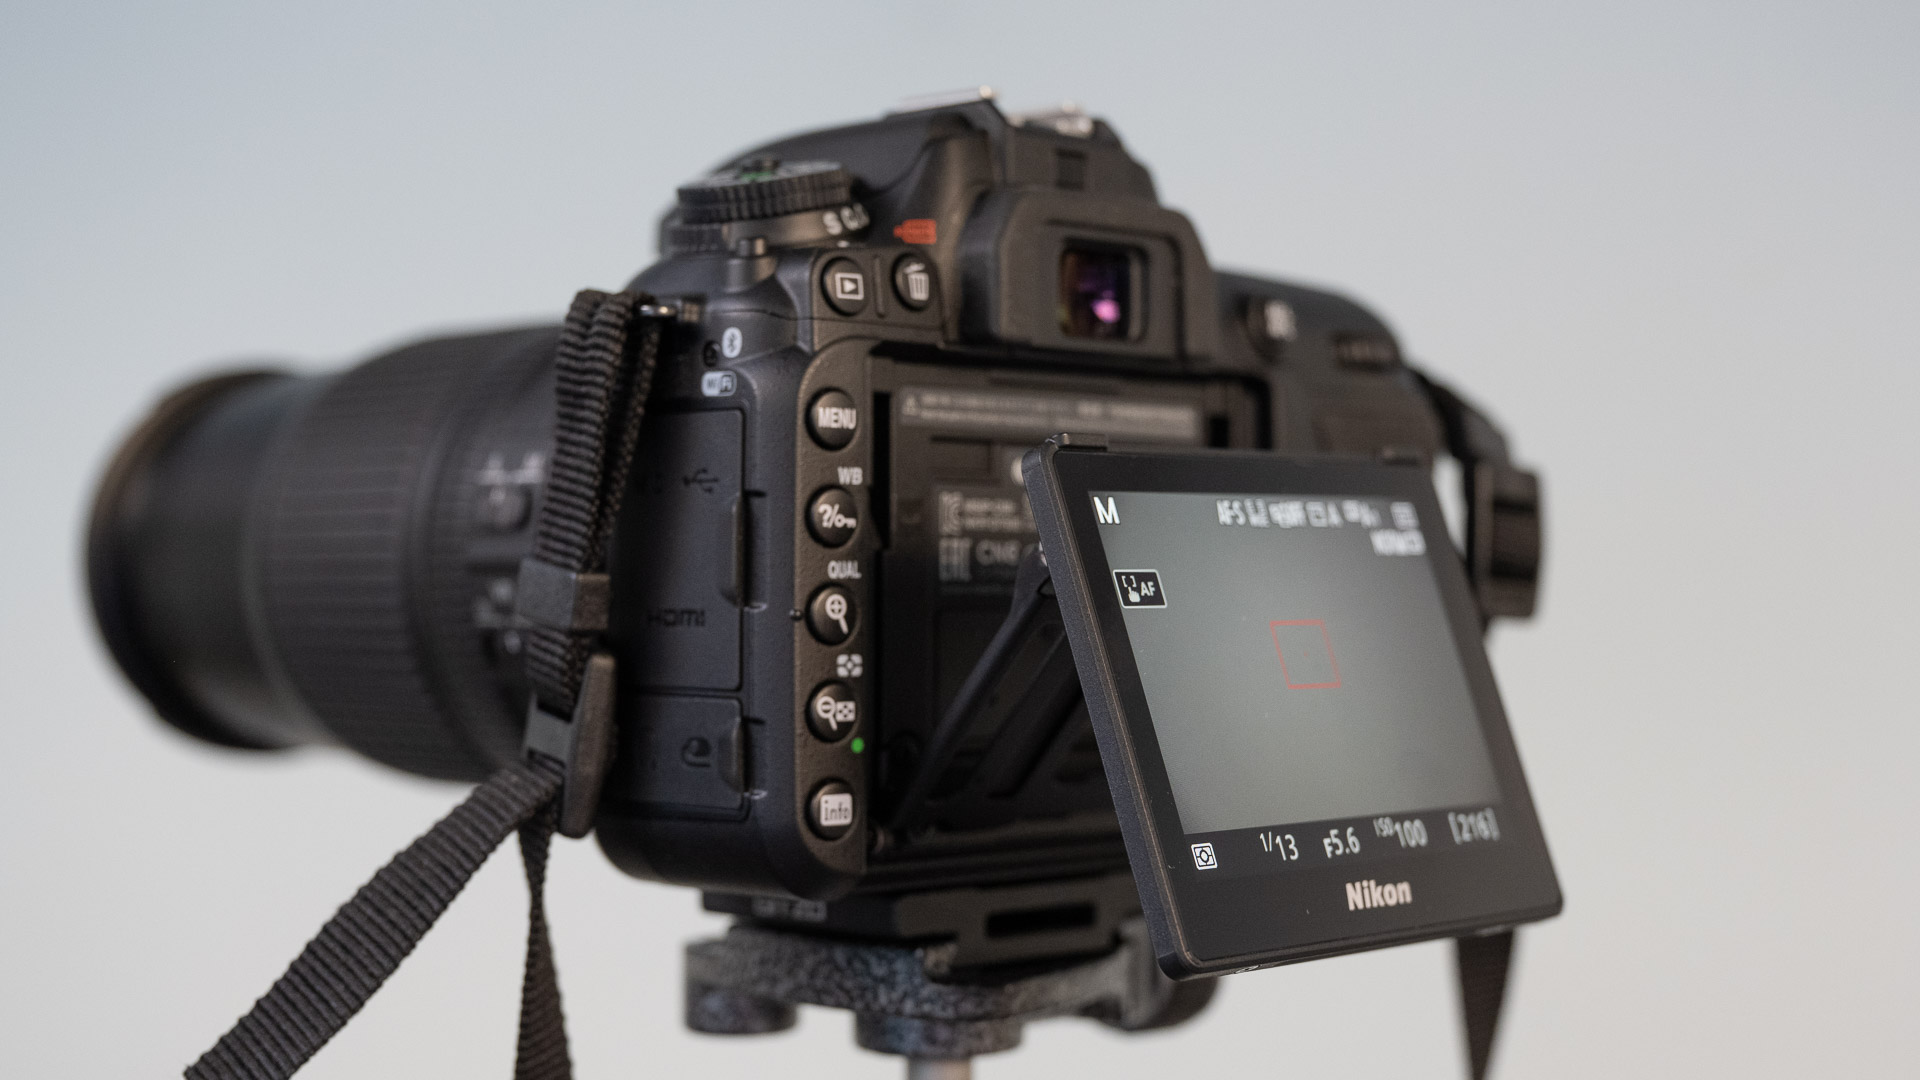 Nikon D7500 with rear screen tilting out from body